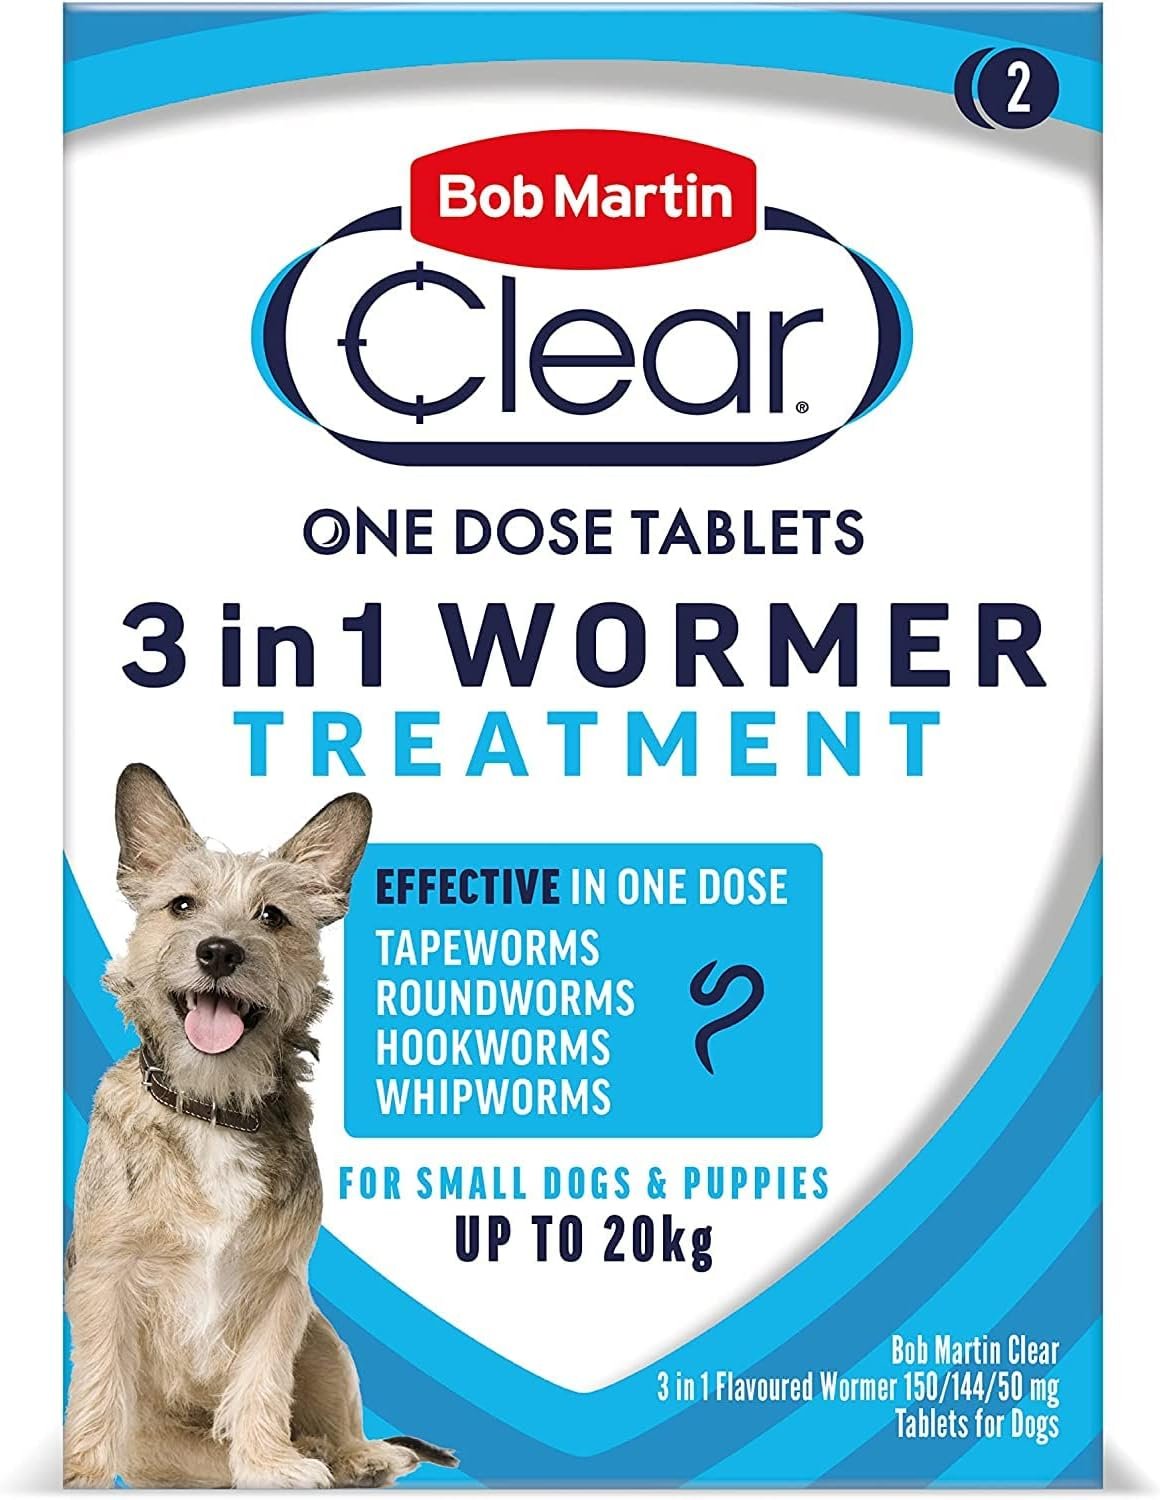 bob martin 3 in 1 wormer tablets review